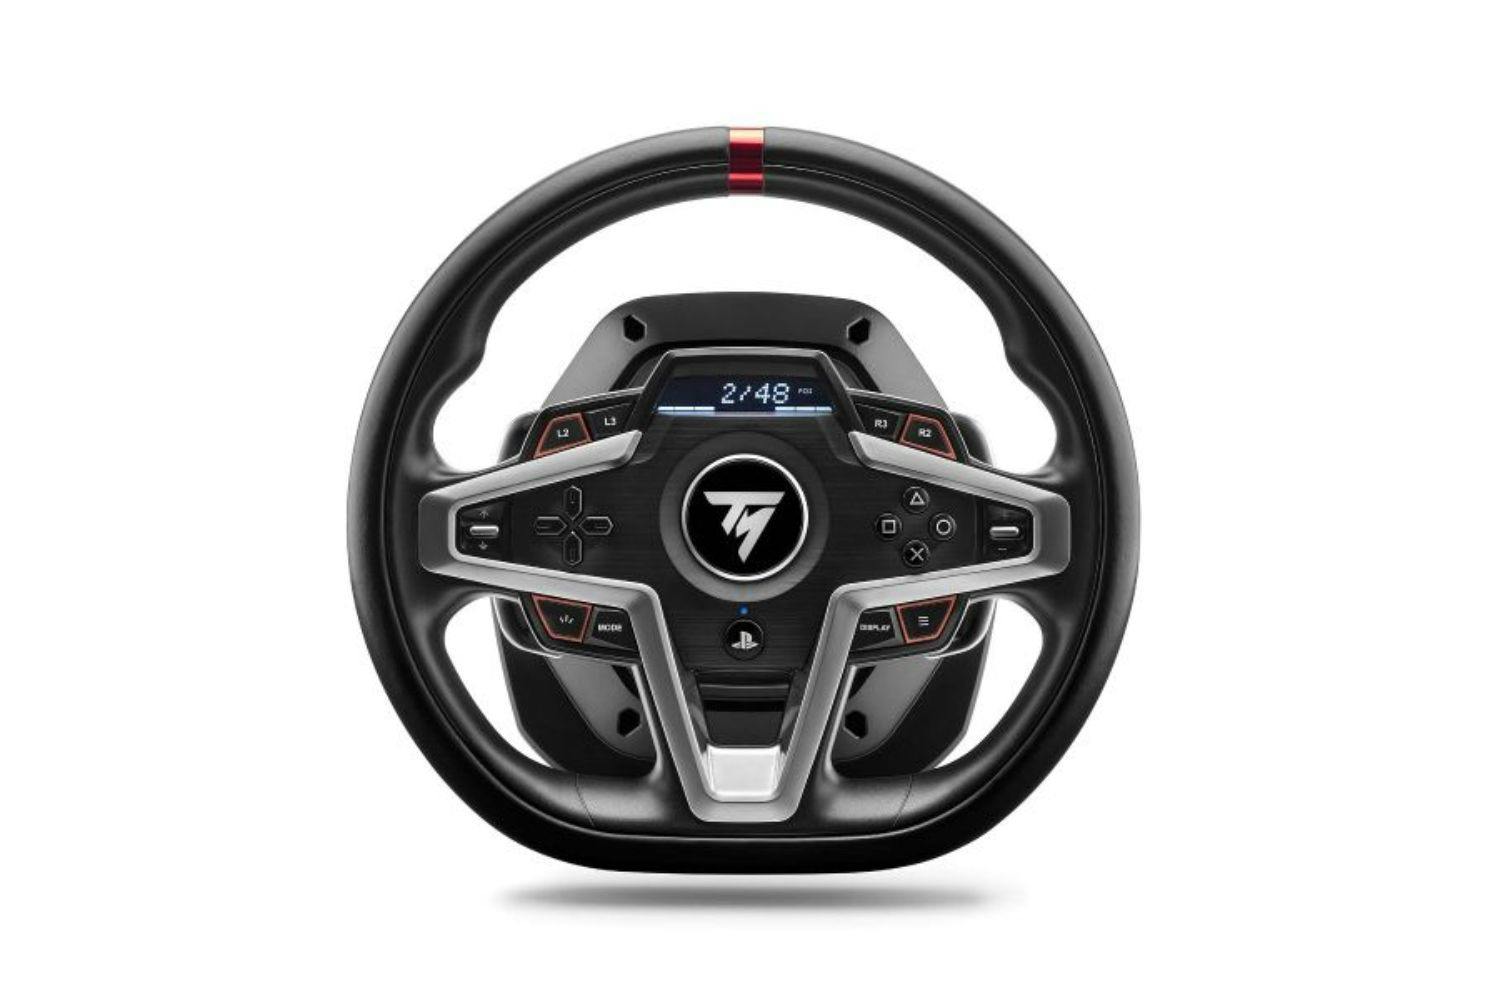 Pack volante y pedales Thrustmaster T248 PS Licence para PS5 y PS4